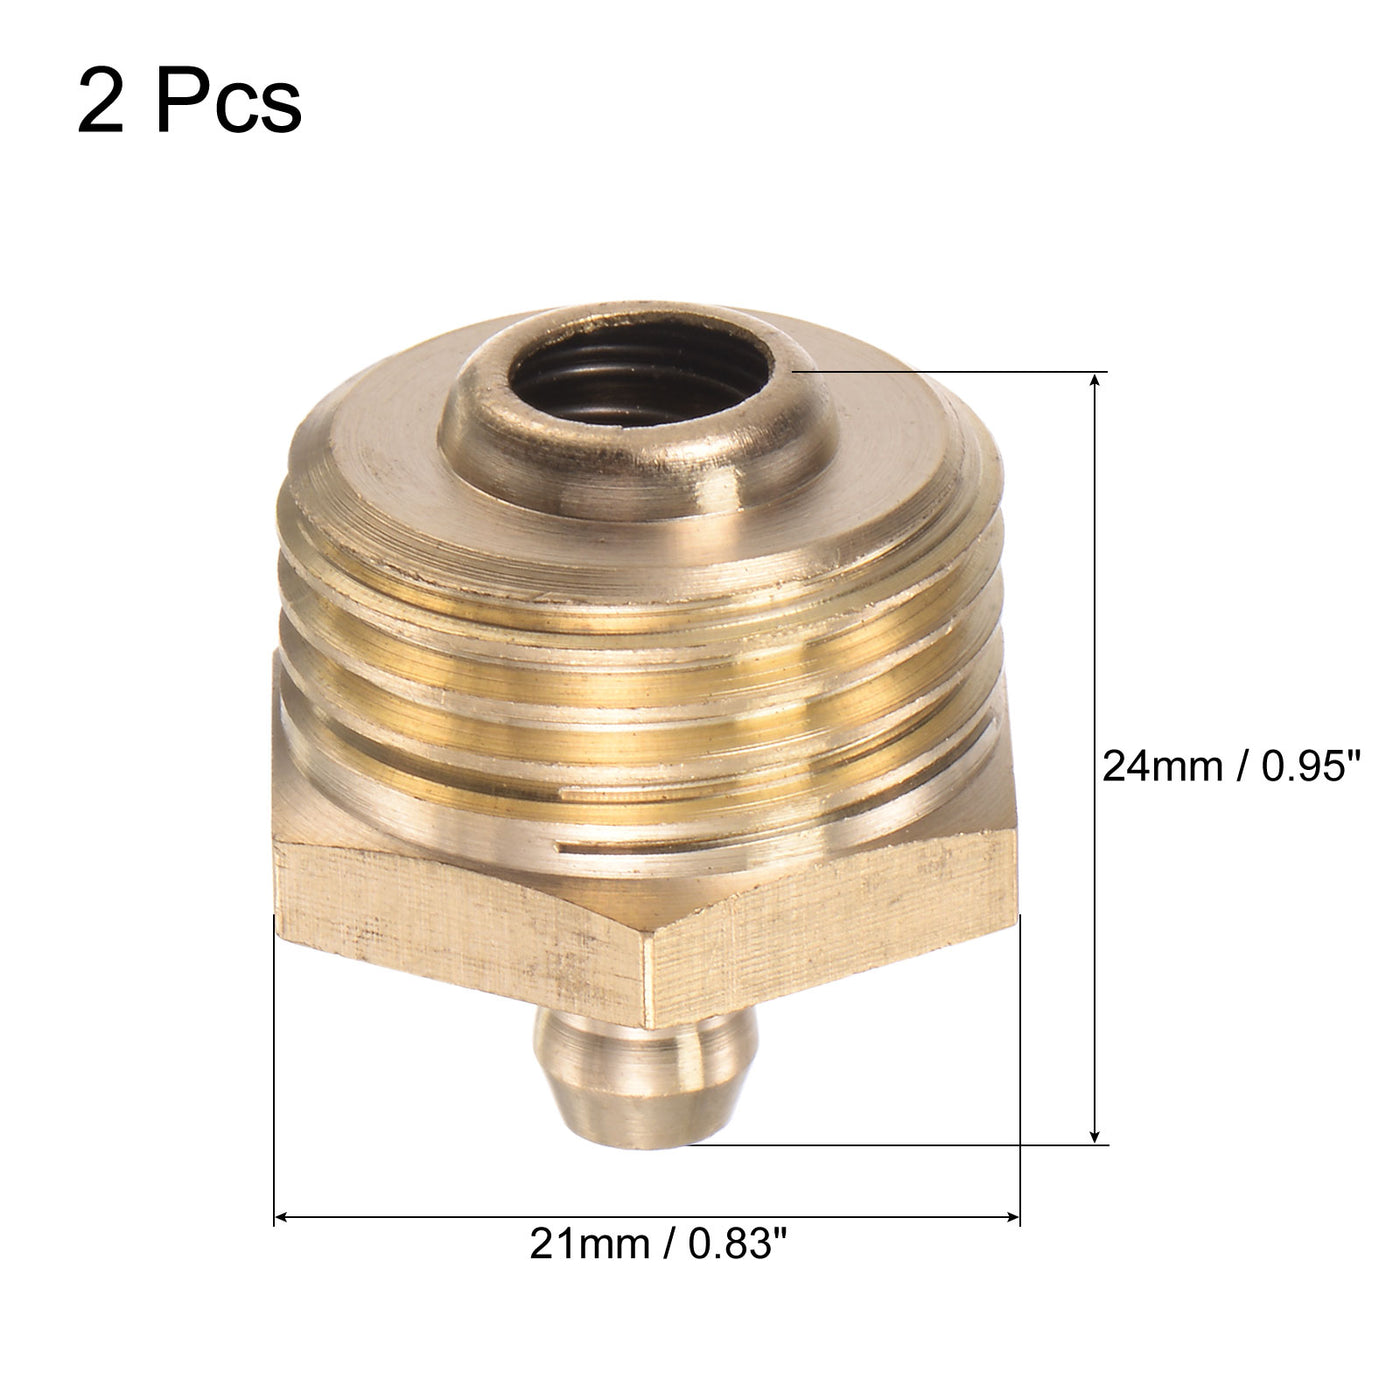 Uxcell Uxcell Brass Straight Hydraulic Grease Fitting G1/2 Thread 21mm Width, 2Pcs